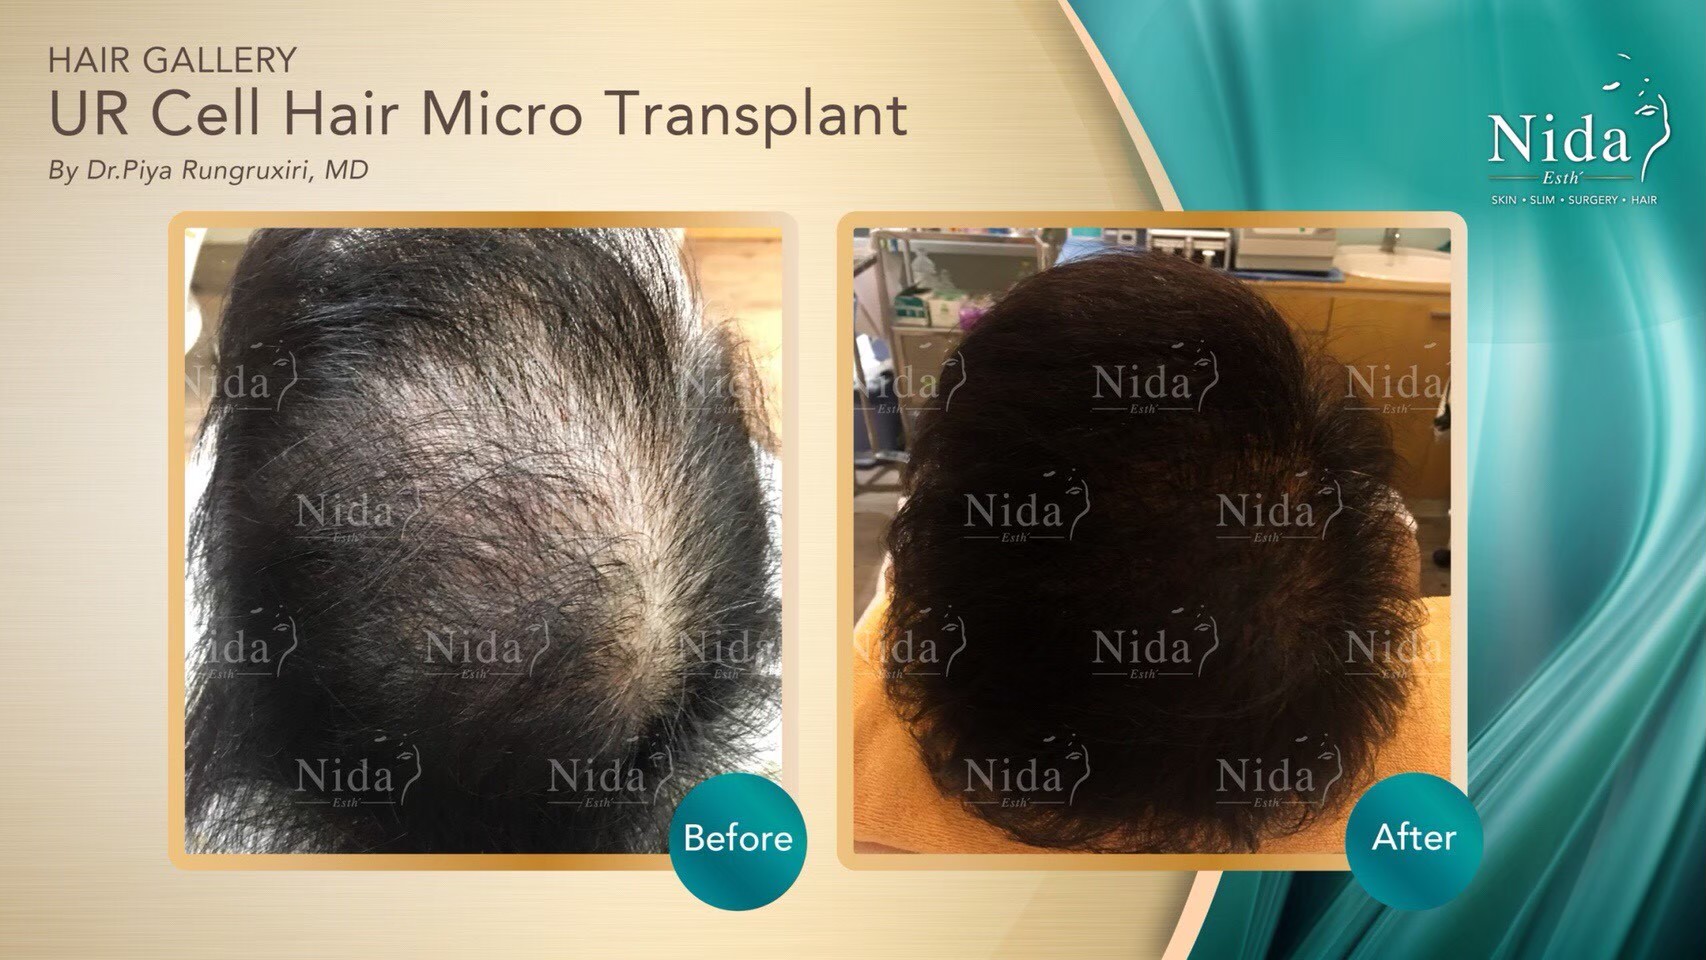 Before - After Ur cell Hair Micro Transplant